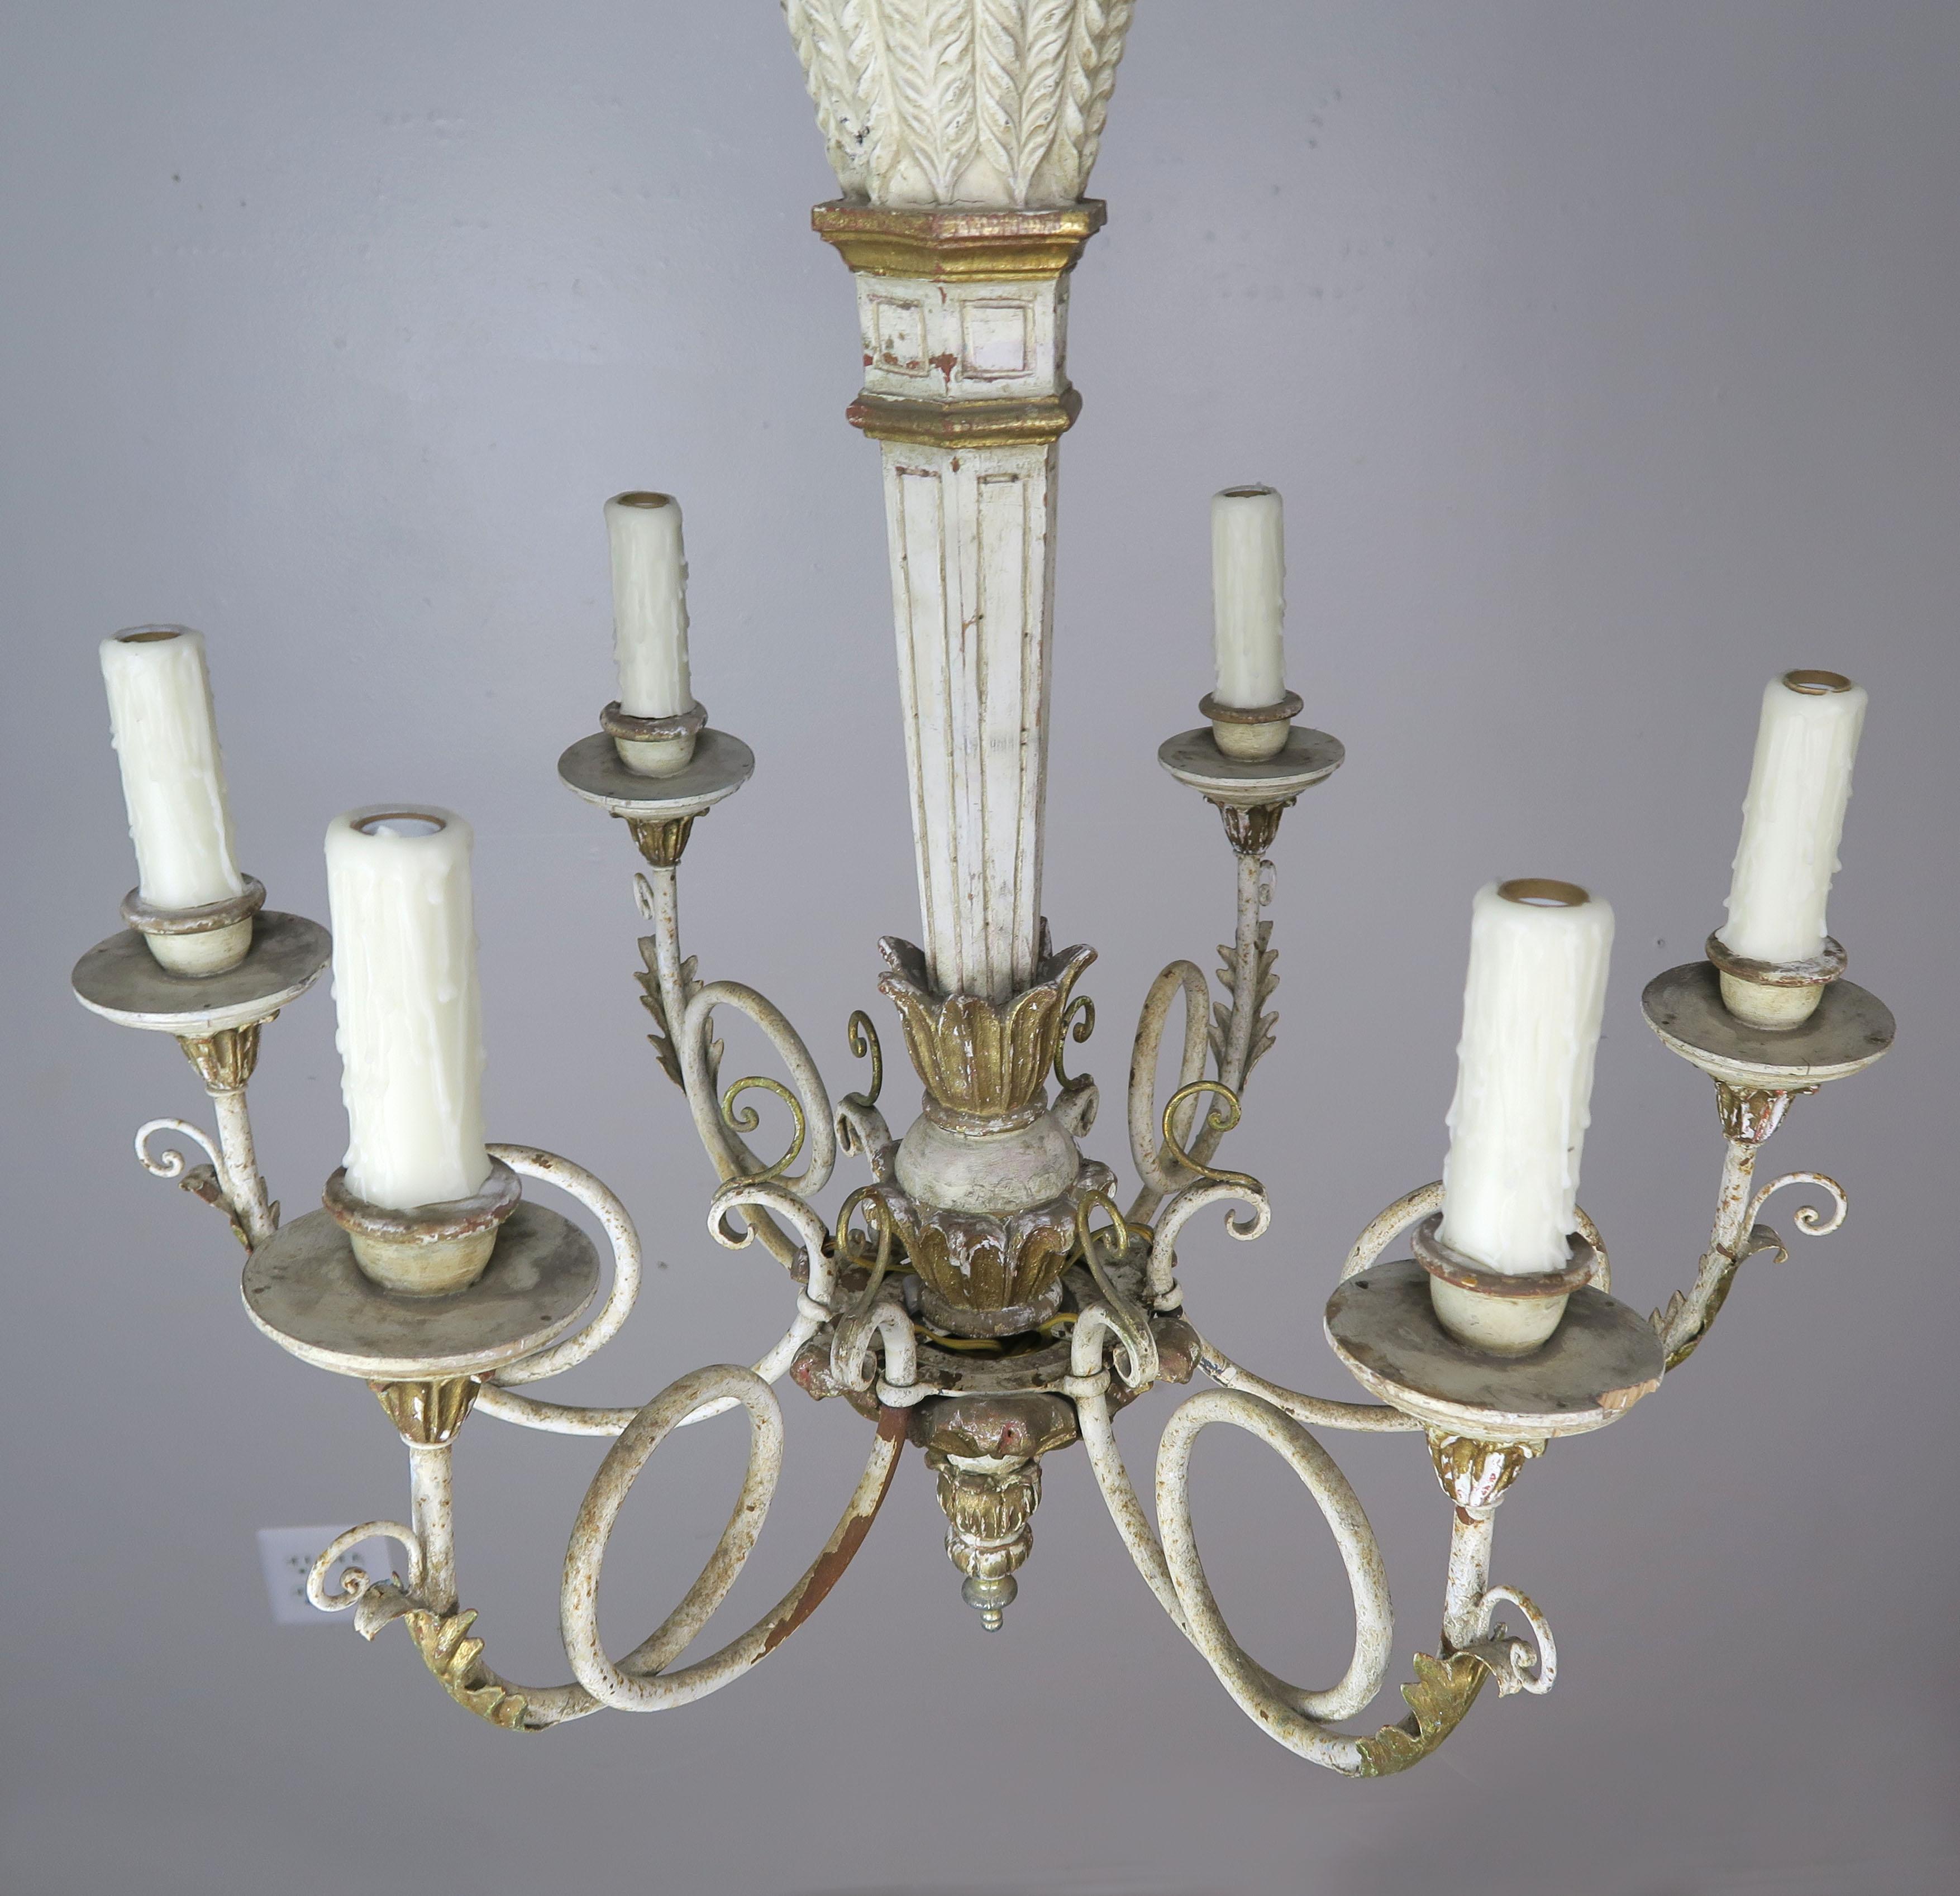 Hand-Painted Italian Painted and Parcel-Gilt Neoclassical Style Chandelier